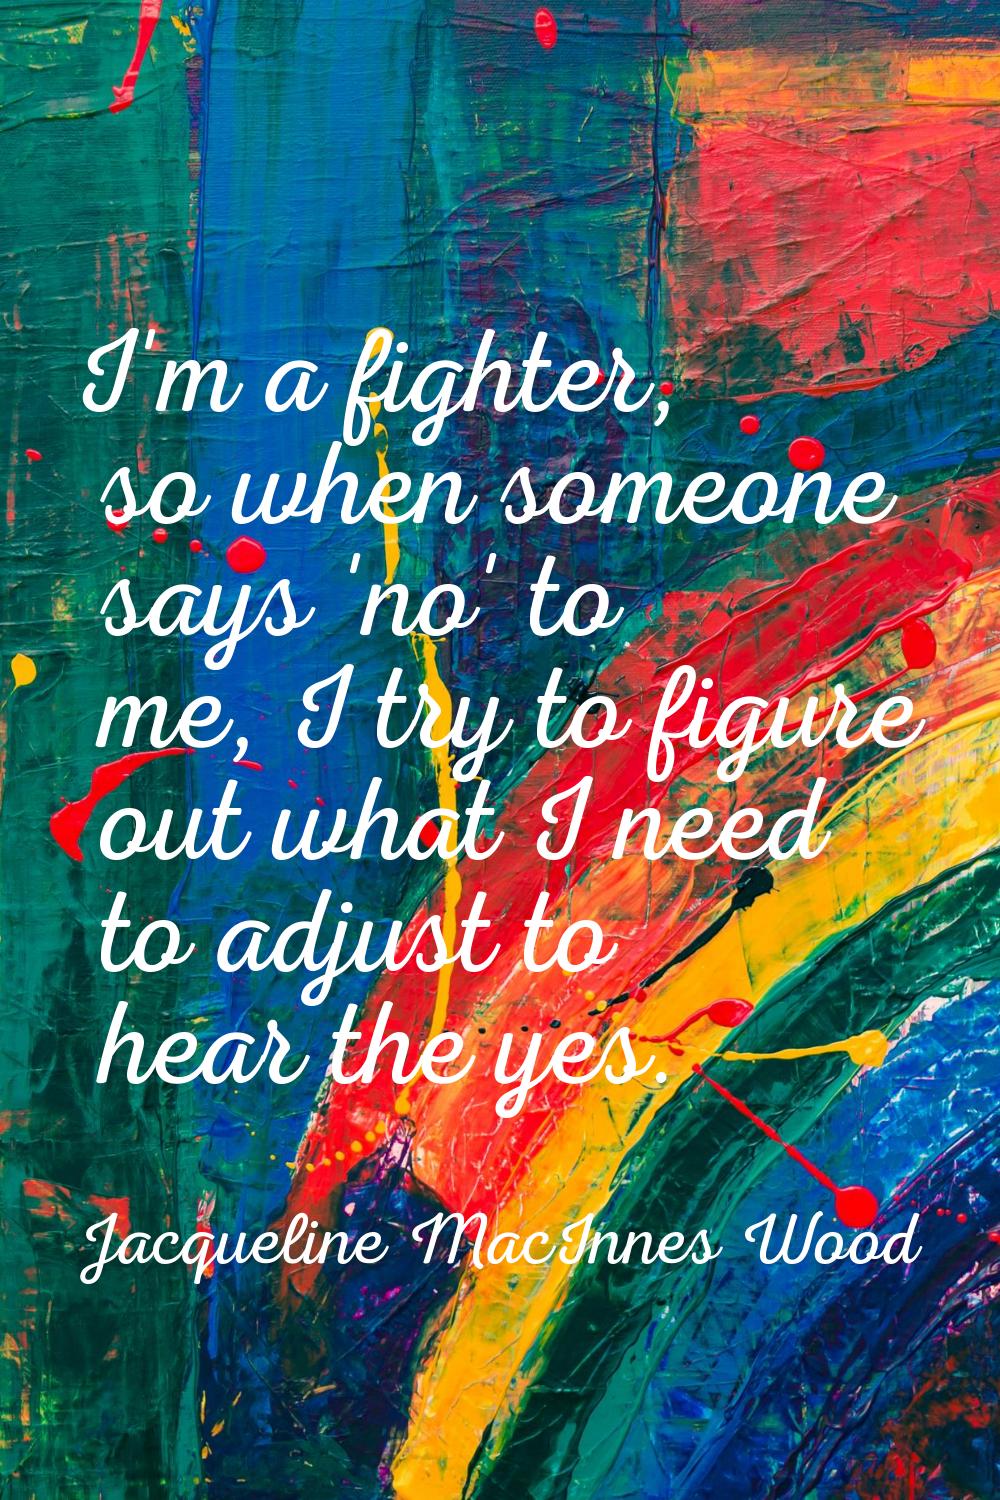 I'm a fighter, so when someone says 'no' to me, I try to figure out what I need to adjust to hear t